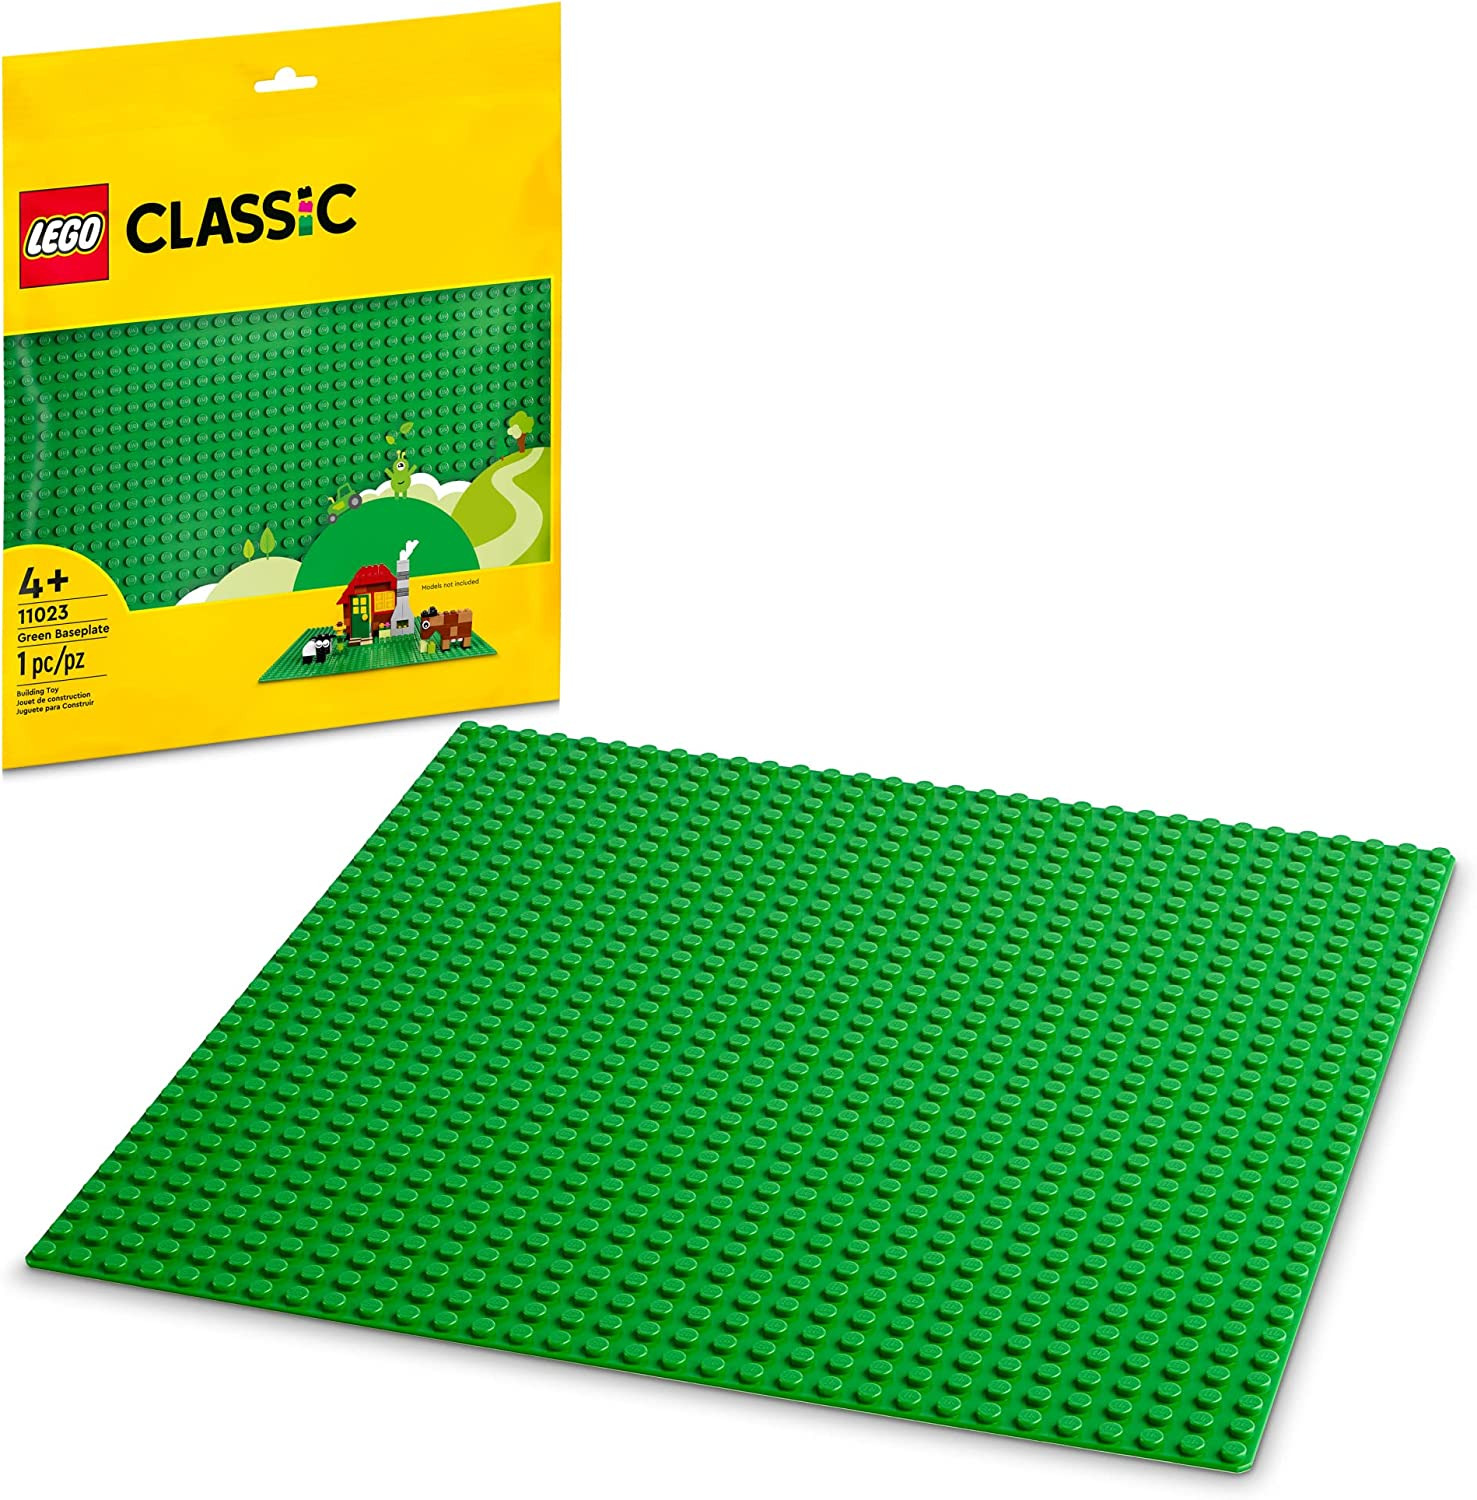 LEGO Classic Green Baseplate 11023 Creative Toy, Essential Back to School Suppli